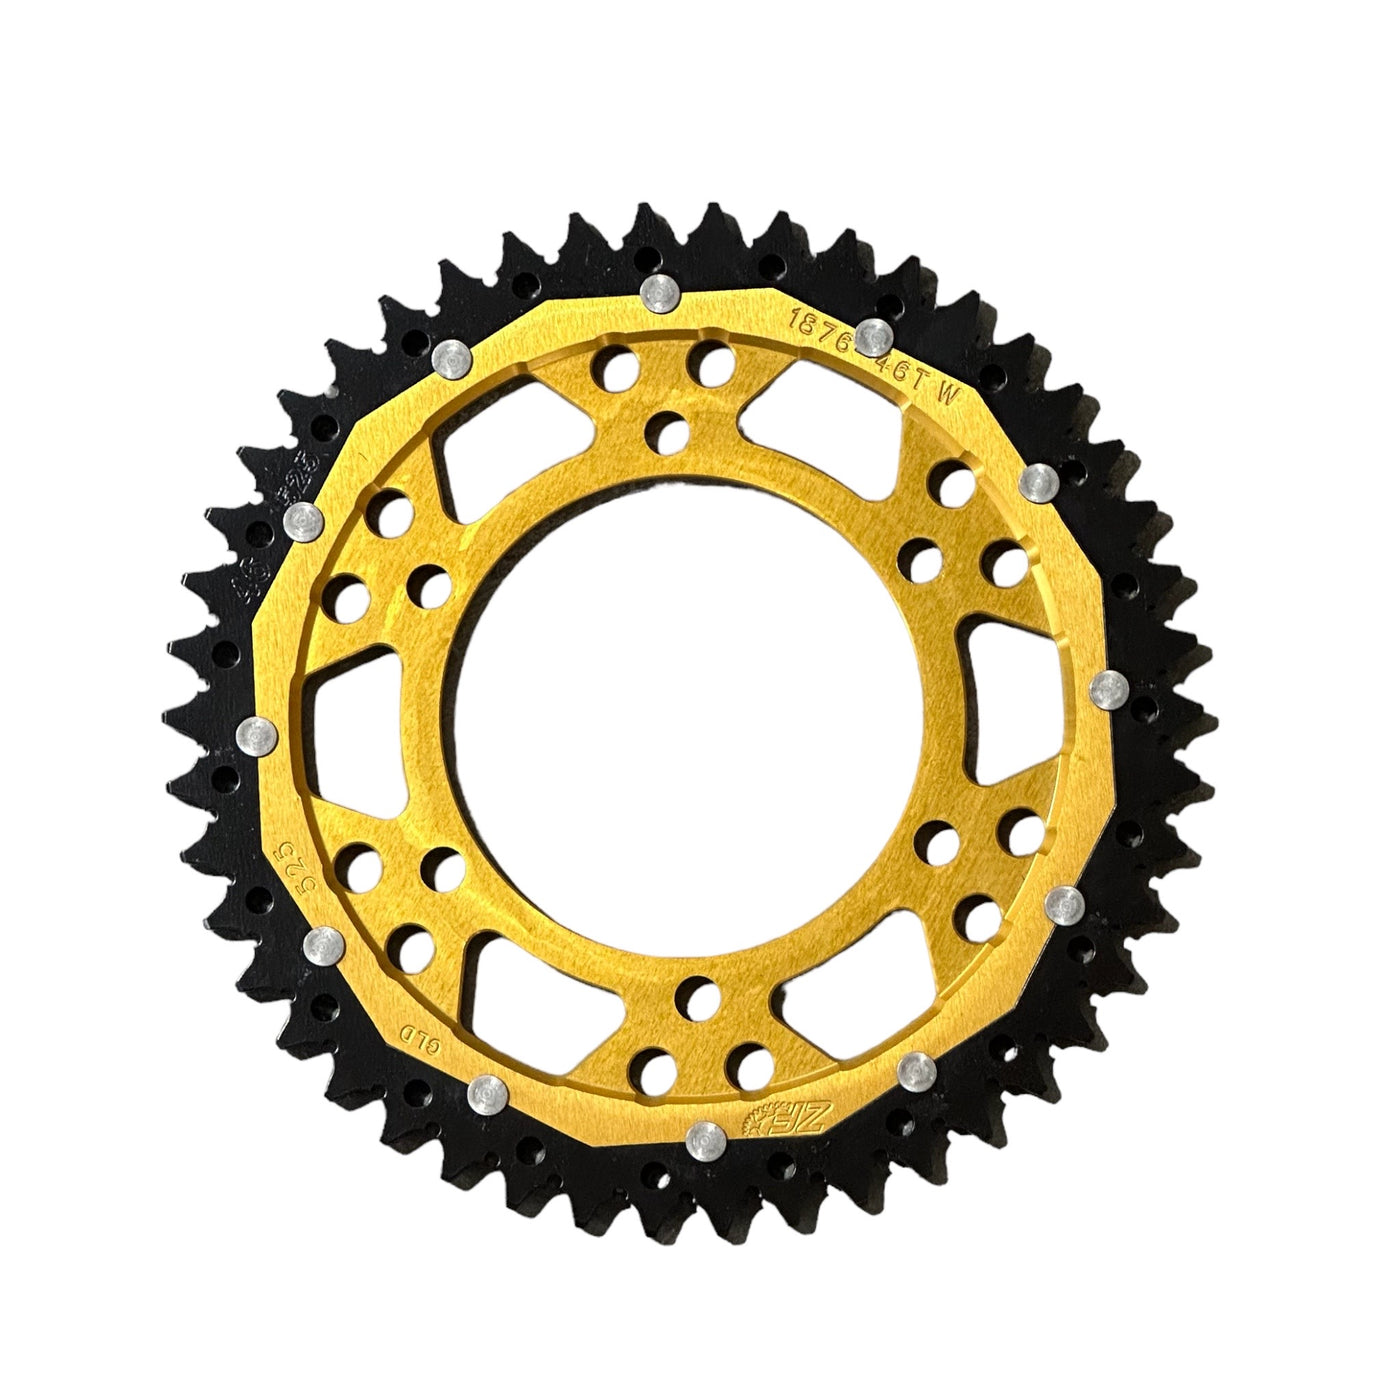 ZF Rear Sprocket for YAMAHA Tenere 700 / Rally Edition / World Raid, R6, MT-07 Tracer, Tracer 7, MT-09, XSR 900 & 900 Tracer / GT